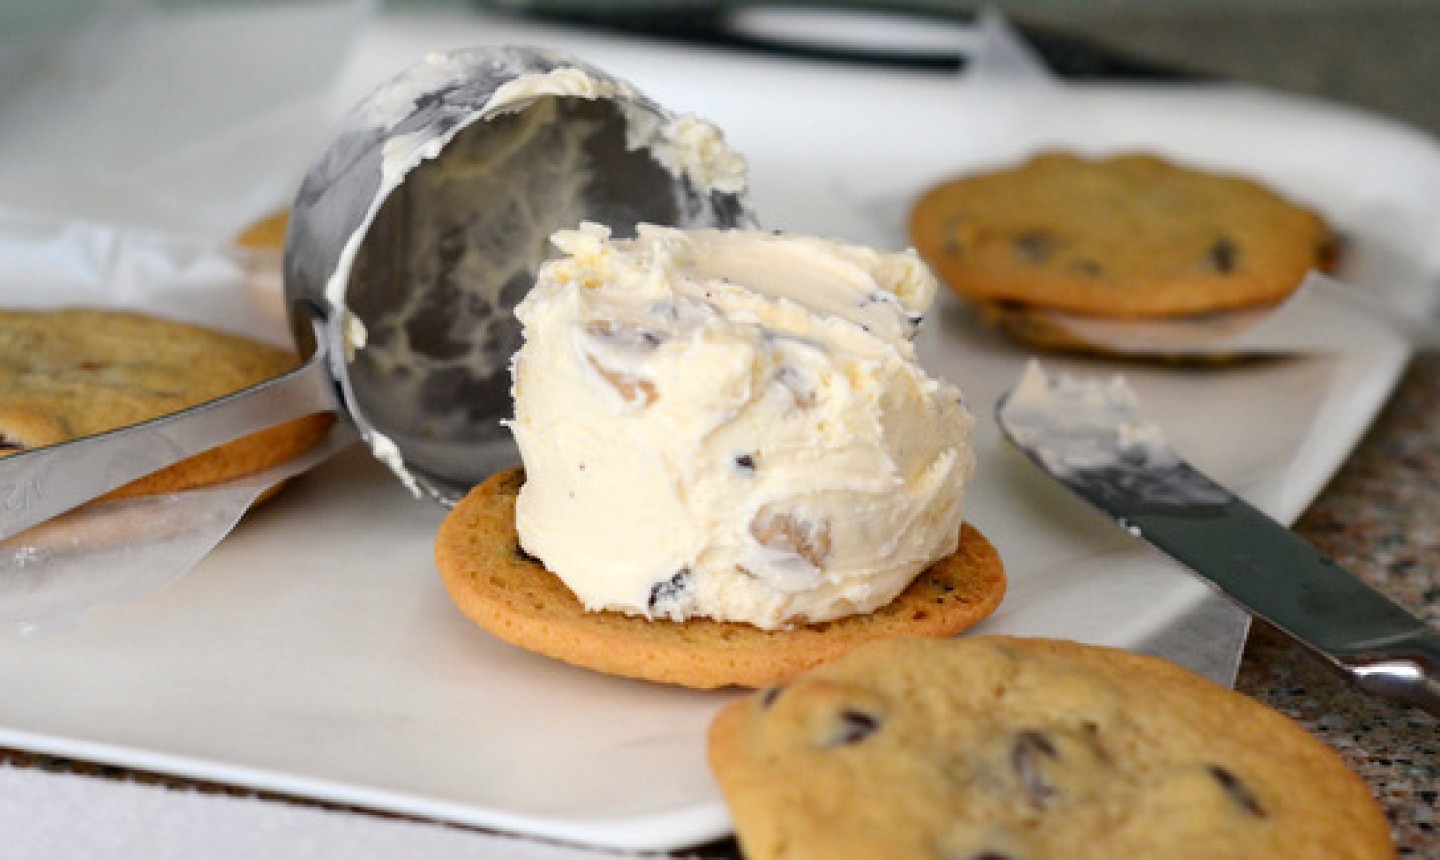 placing ice cream on chocolate chip cookie